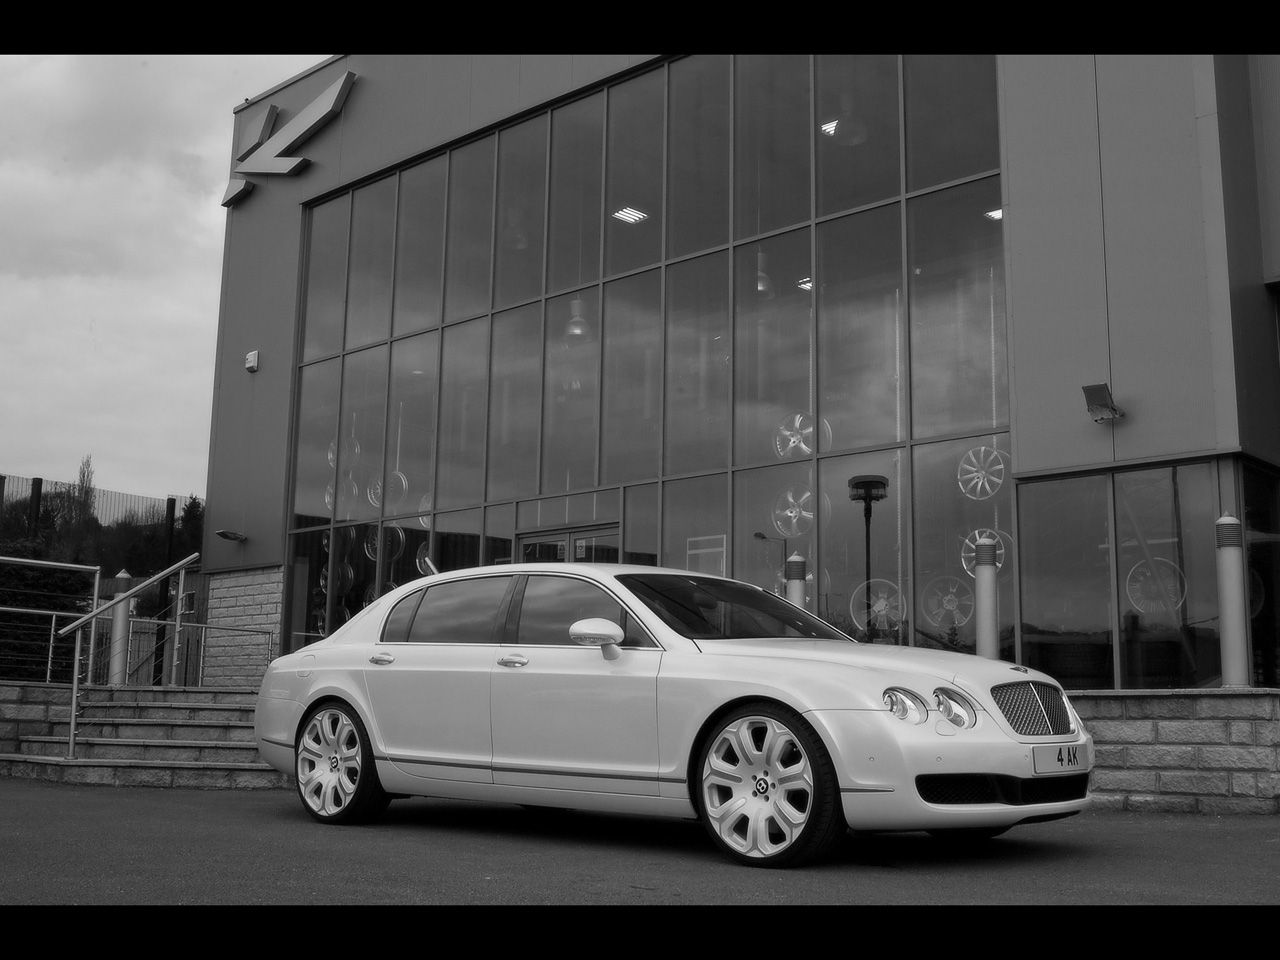 2009 Project Kahn Pearl White Bentley Flying Spur